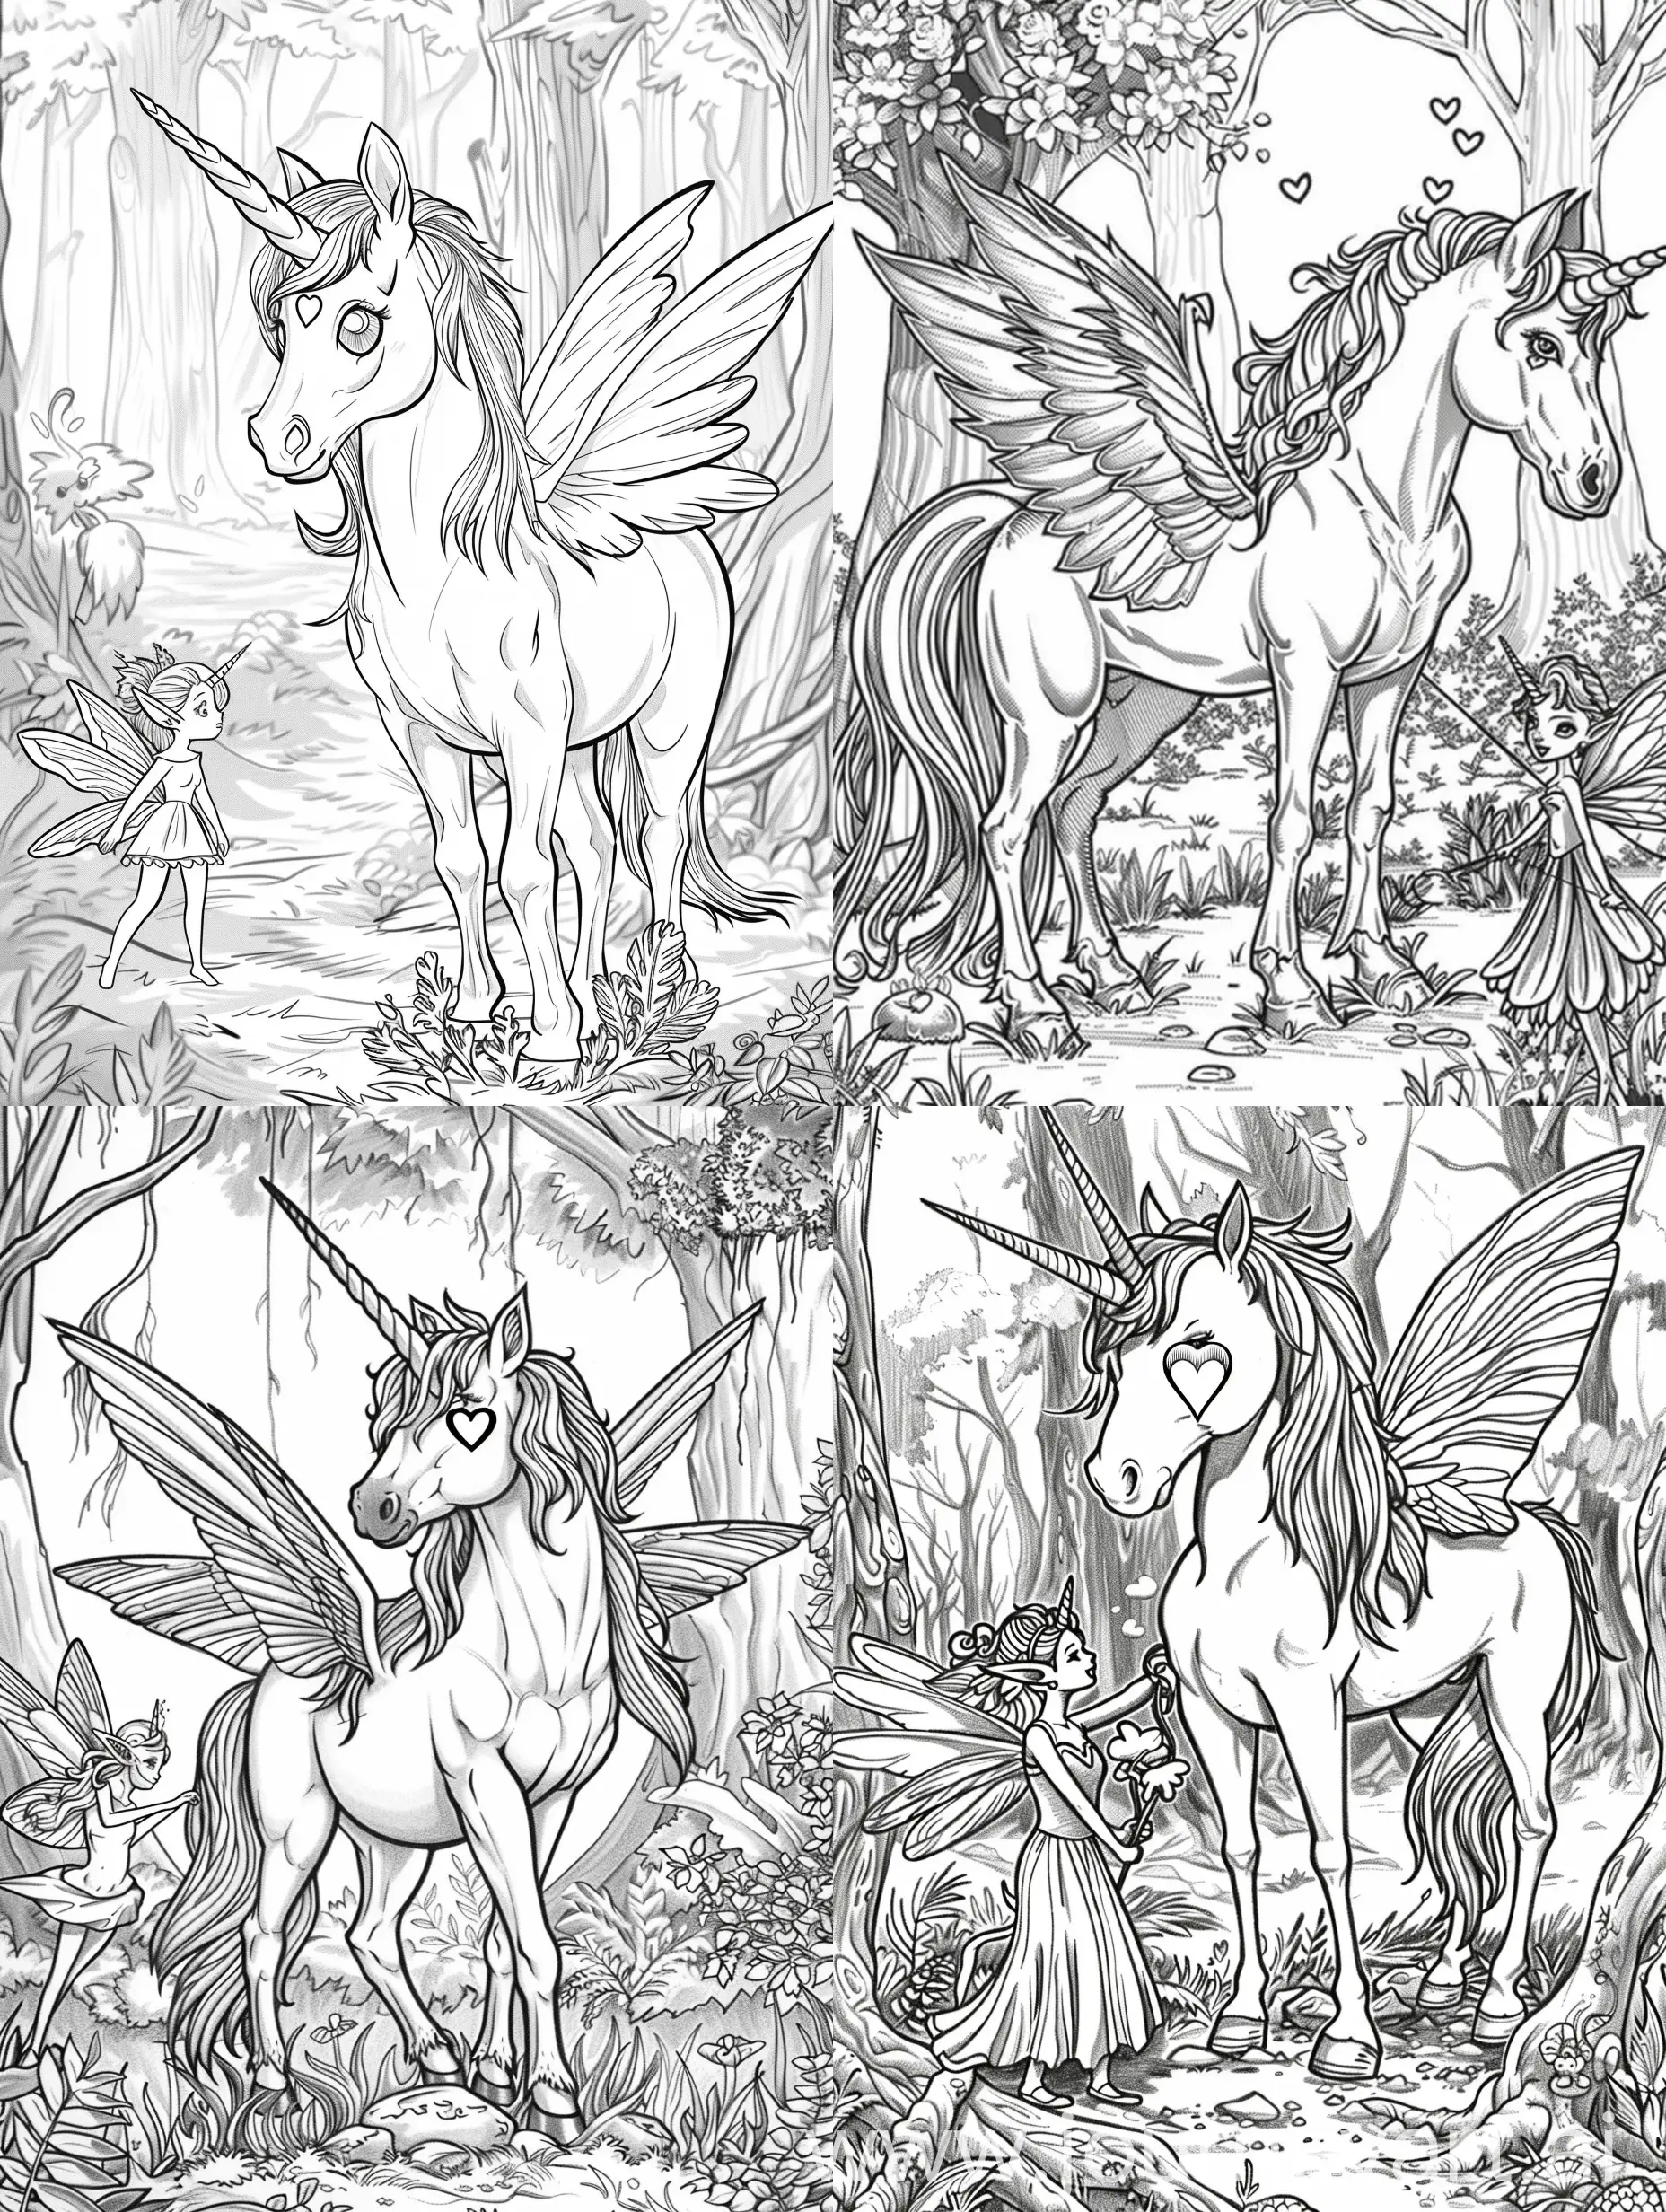 coloring book about a unicorn in the forest, in a realistic style, heart-shaped eyes, with wings, with a fairy friend,